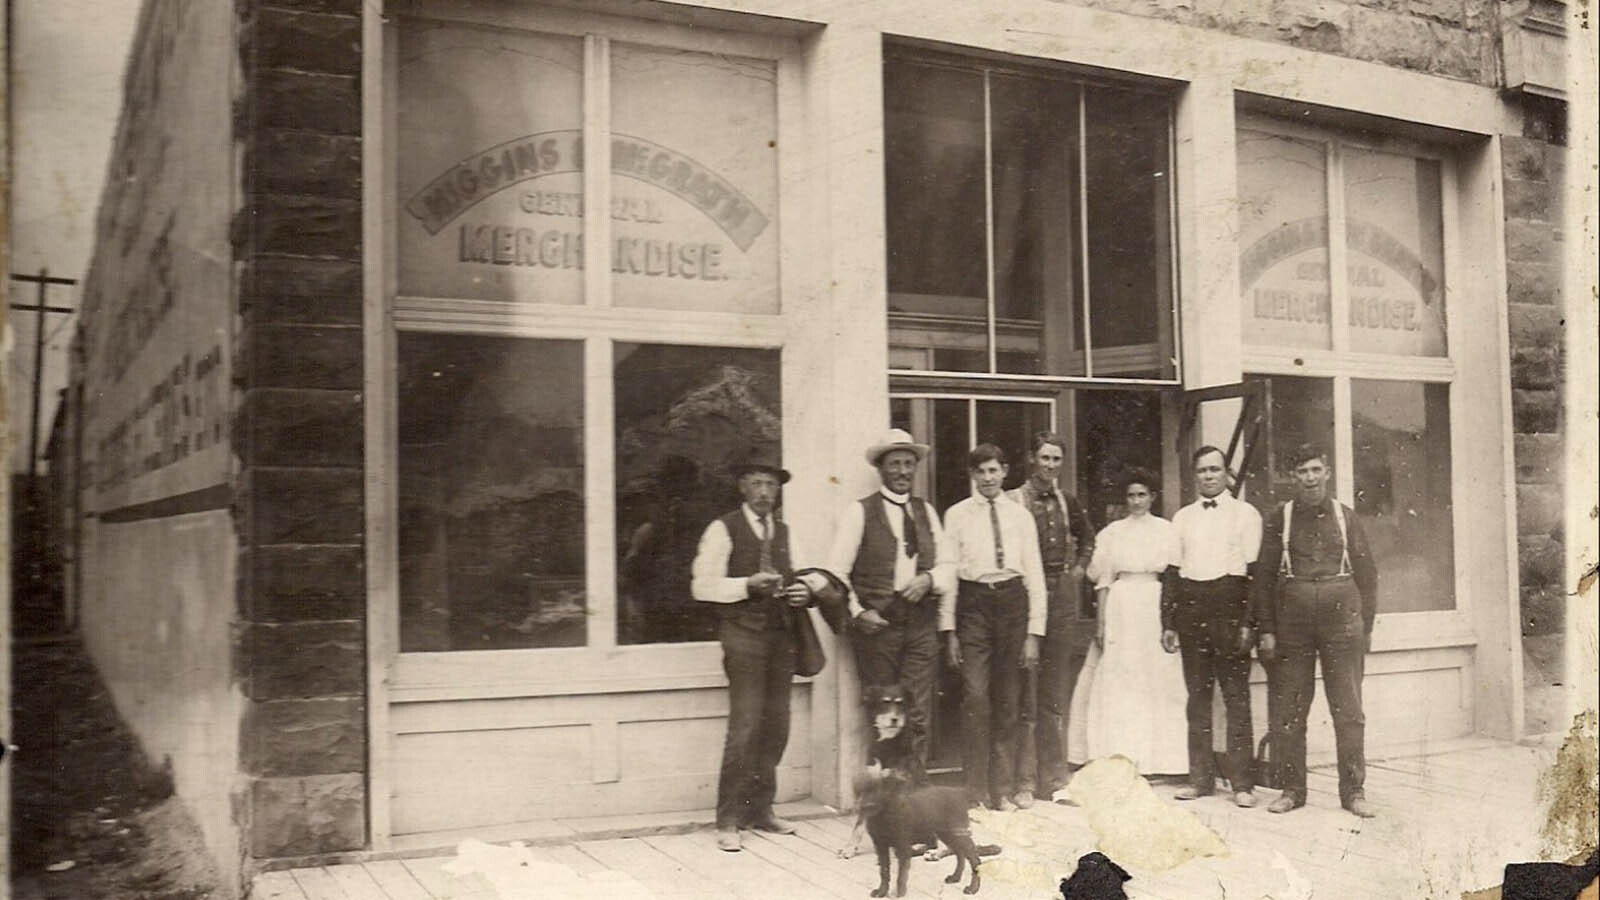 The Higgins McGrath General Merchandise Store was a important business that helped build Thermopolis in its early days.